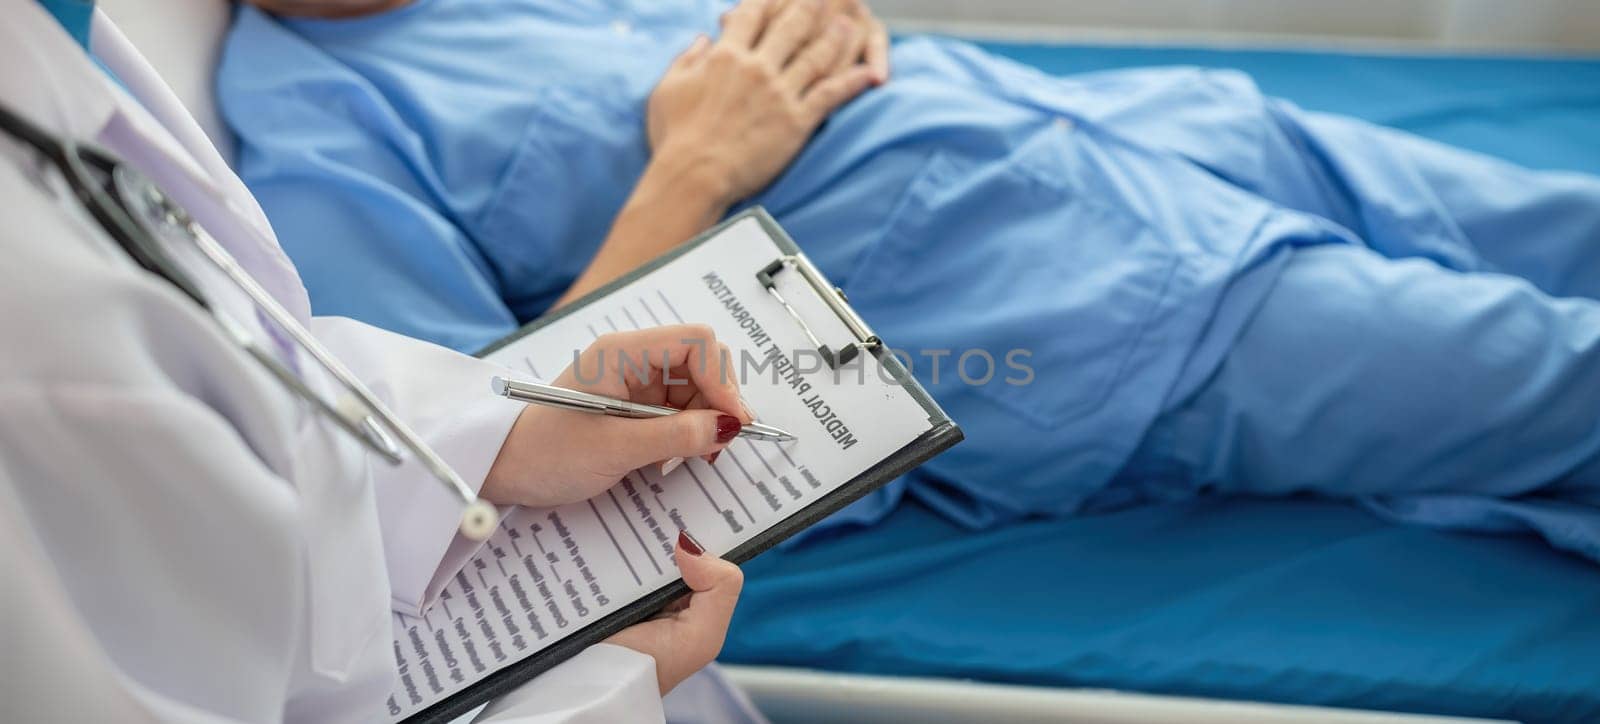 A female doctor is examining the body and taking notes on a sick person in a hospital examination room..